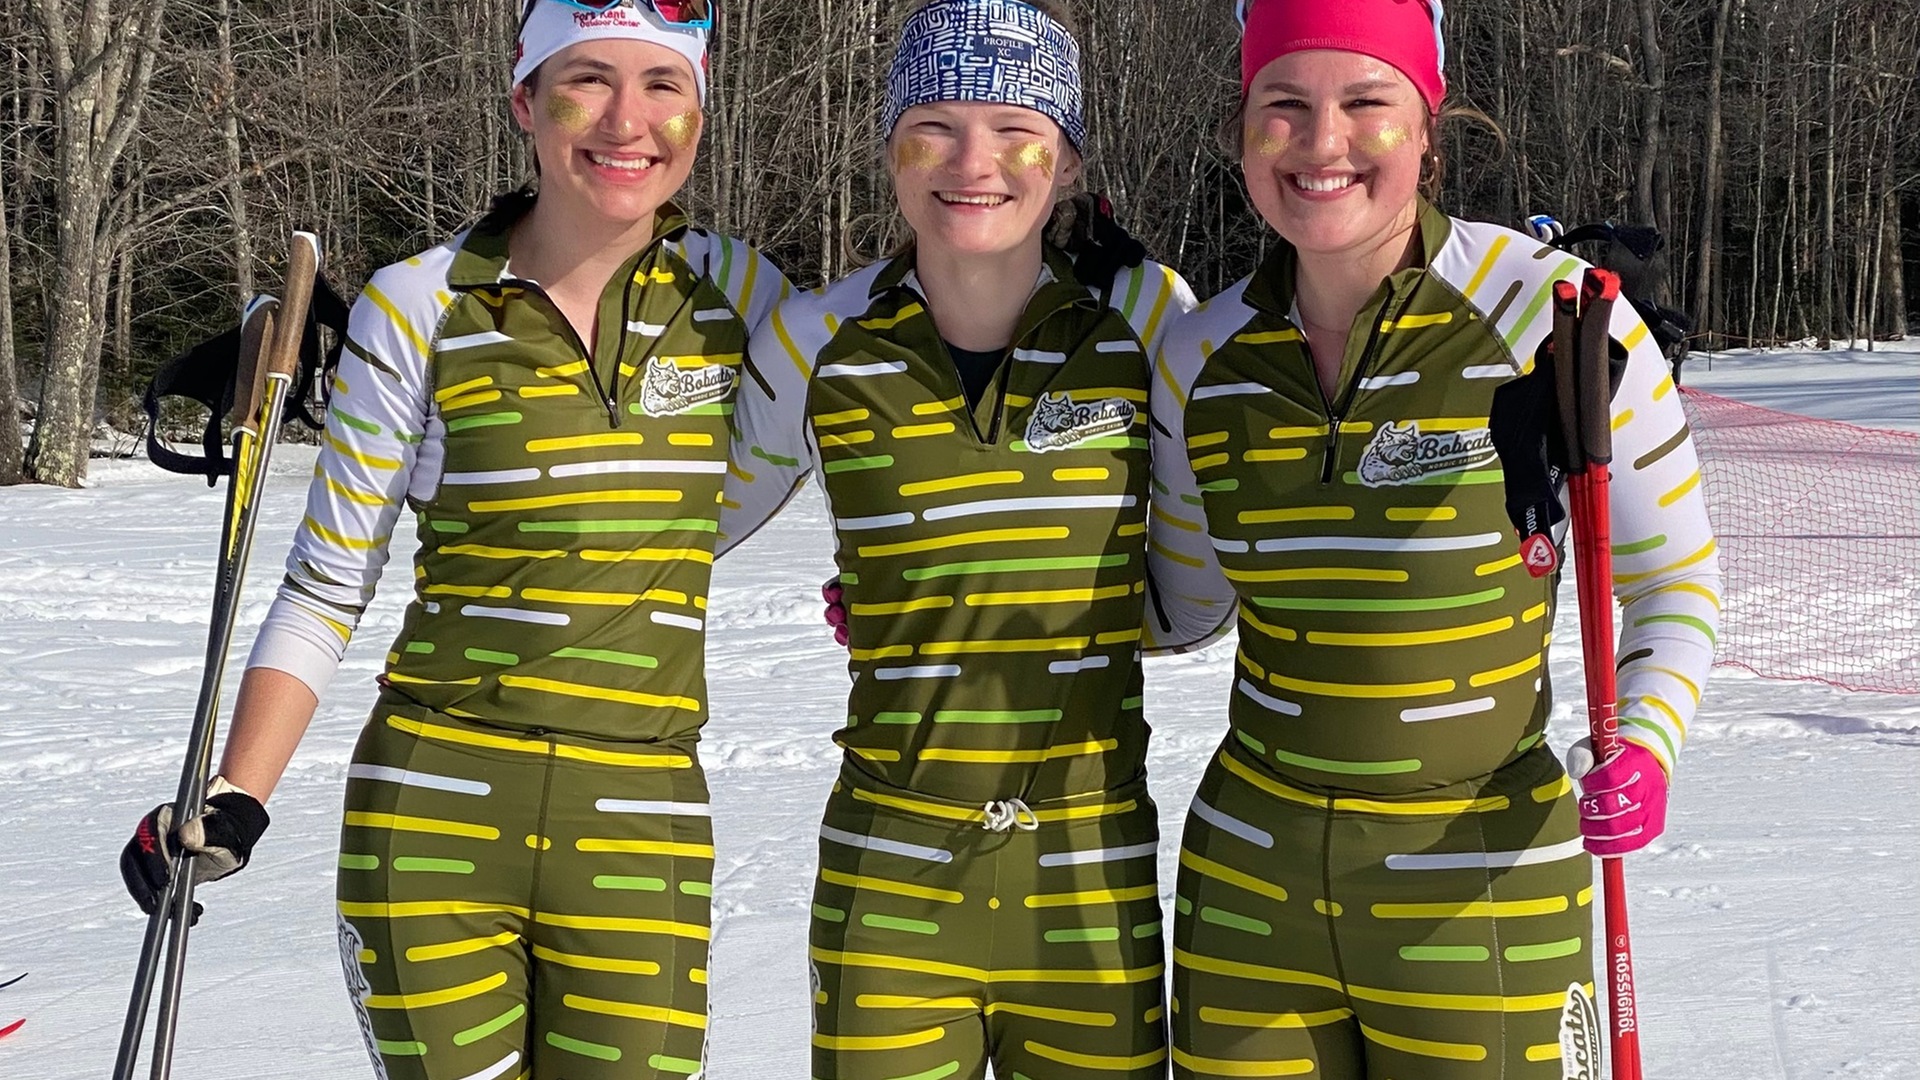 Dolcie Tanguay (left), Jessie Church (center), and Kaisa Bosek (right) pose after winning the ECSC Divisional Women's Team Relay. Thumbnail